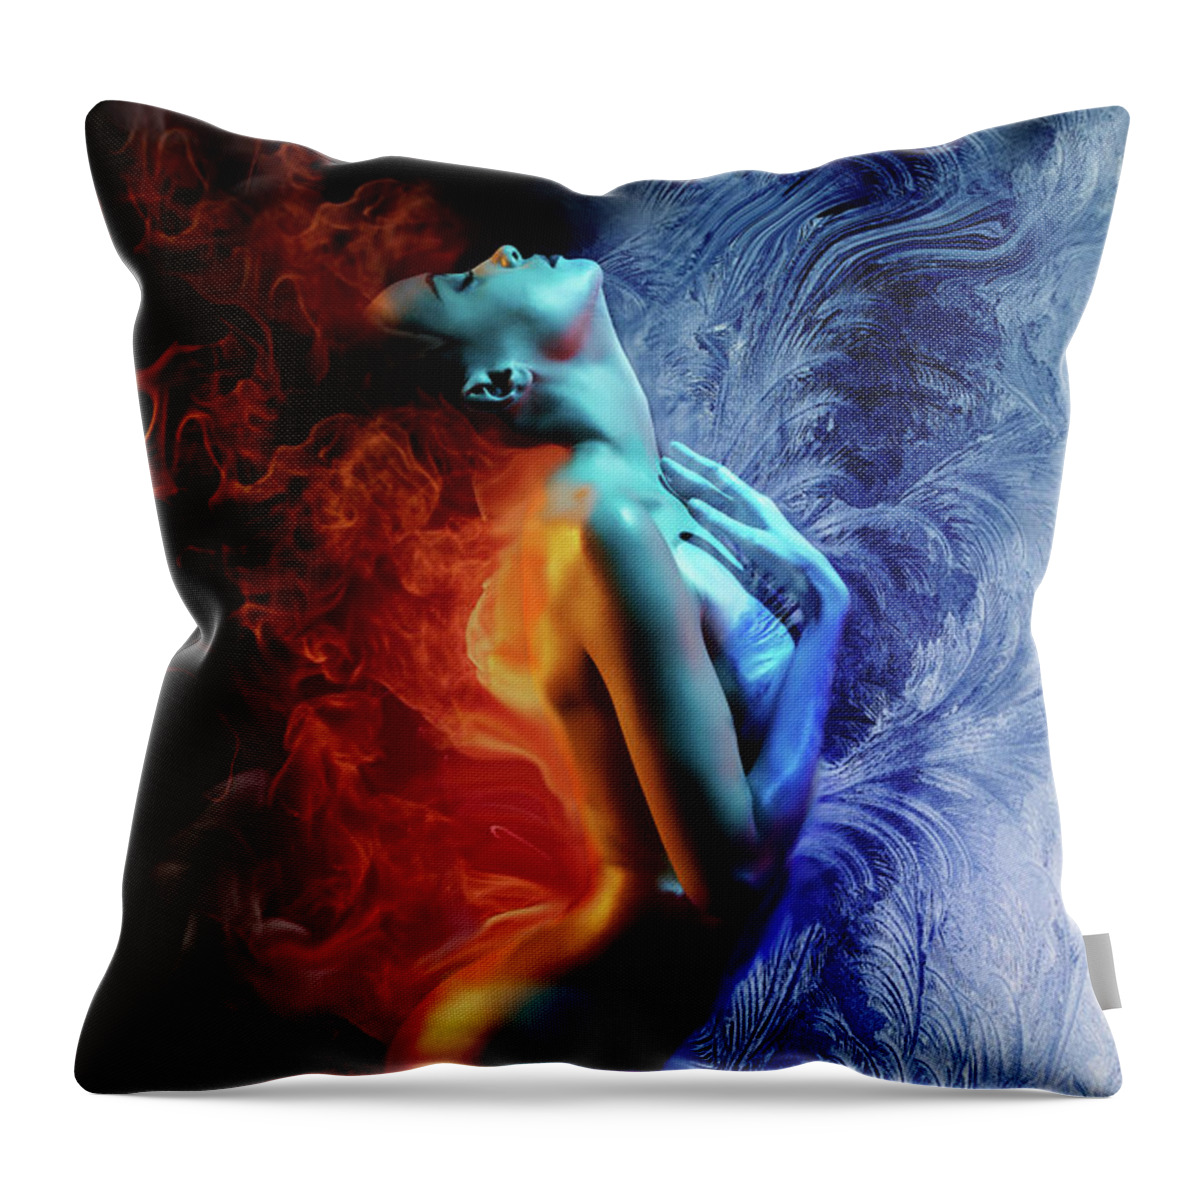 Fire And Ice Throw Pillow featuring the digital art Fire and Ice by Lilia S